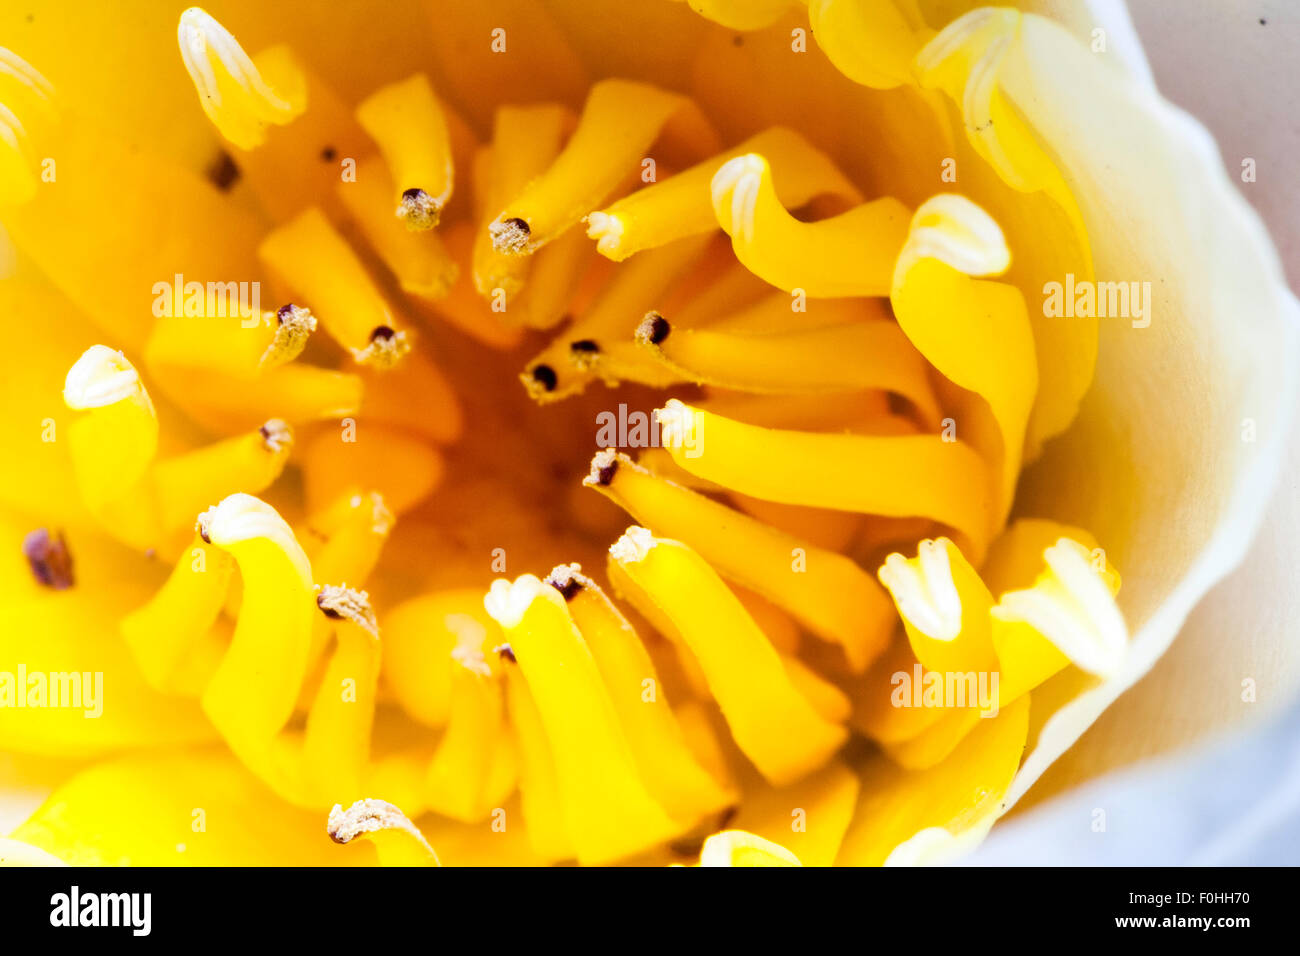 Flower, the White water Lily, Nymphaea alba. Macro close up of the yellow flower head with anthers, filaments and stigma surrounded by white petals. Stock Photo